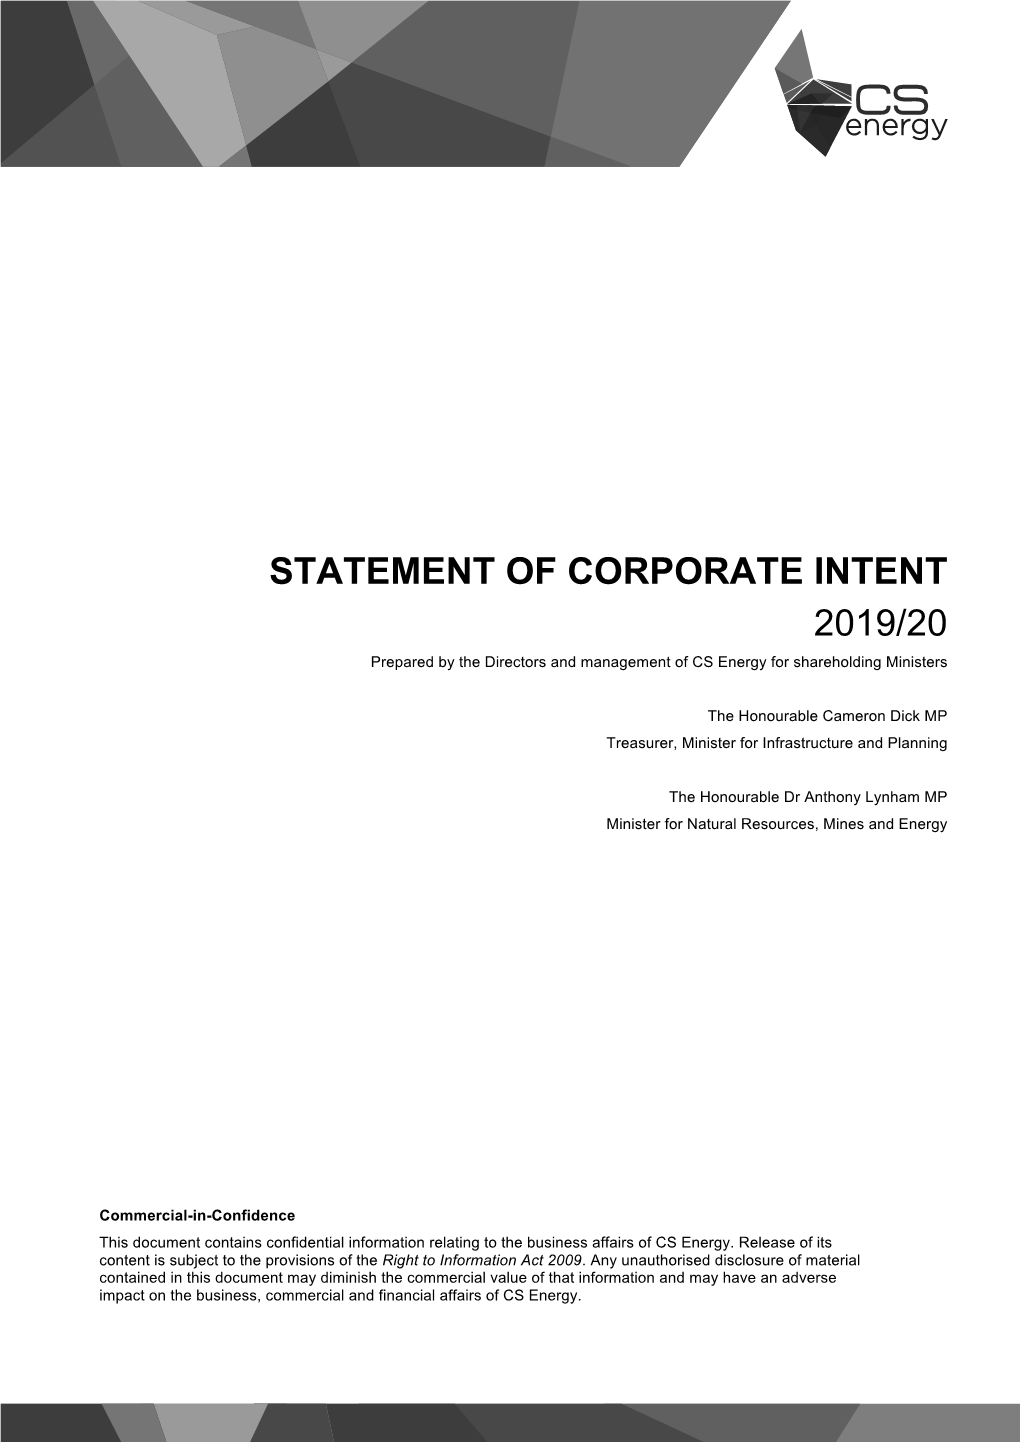 Statement of Corporate Intent 2019/20